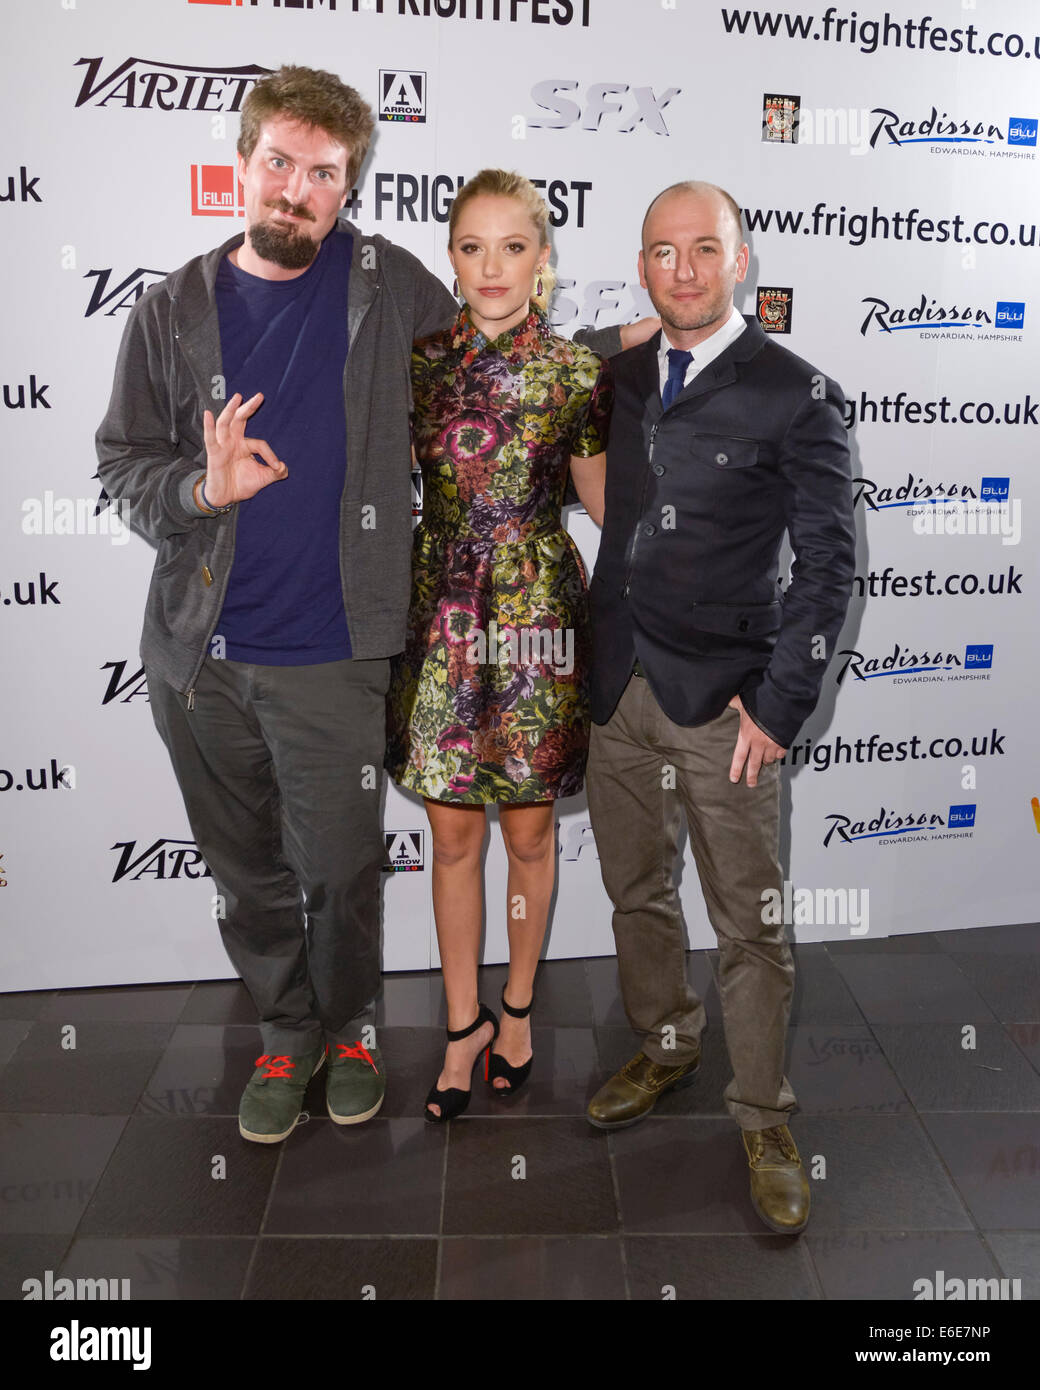 The 15th Film4 Frightfest on 21/08/2014 at The VUE West End, London. Media Wall and Photocall for the opening film The Guest. Attended by the Director (Adam), Writer (Simon) and Actress (Maika). Persons pictured: Adam Wingard, Simon Barratt, Maika Monroe. Picture by Julie Edwards Stock Photo